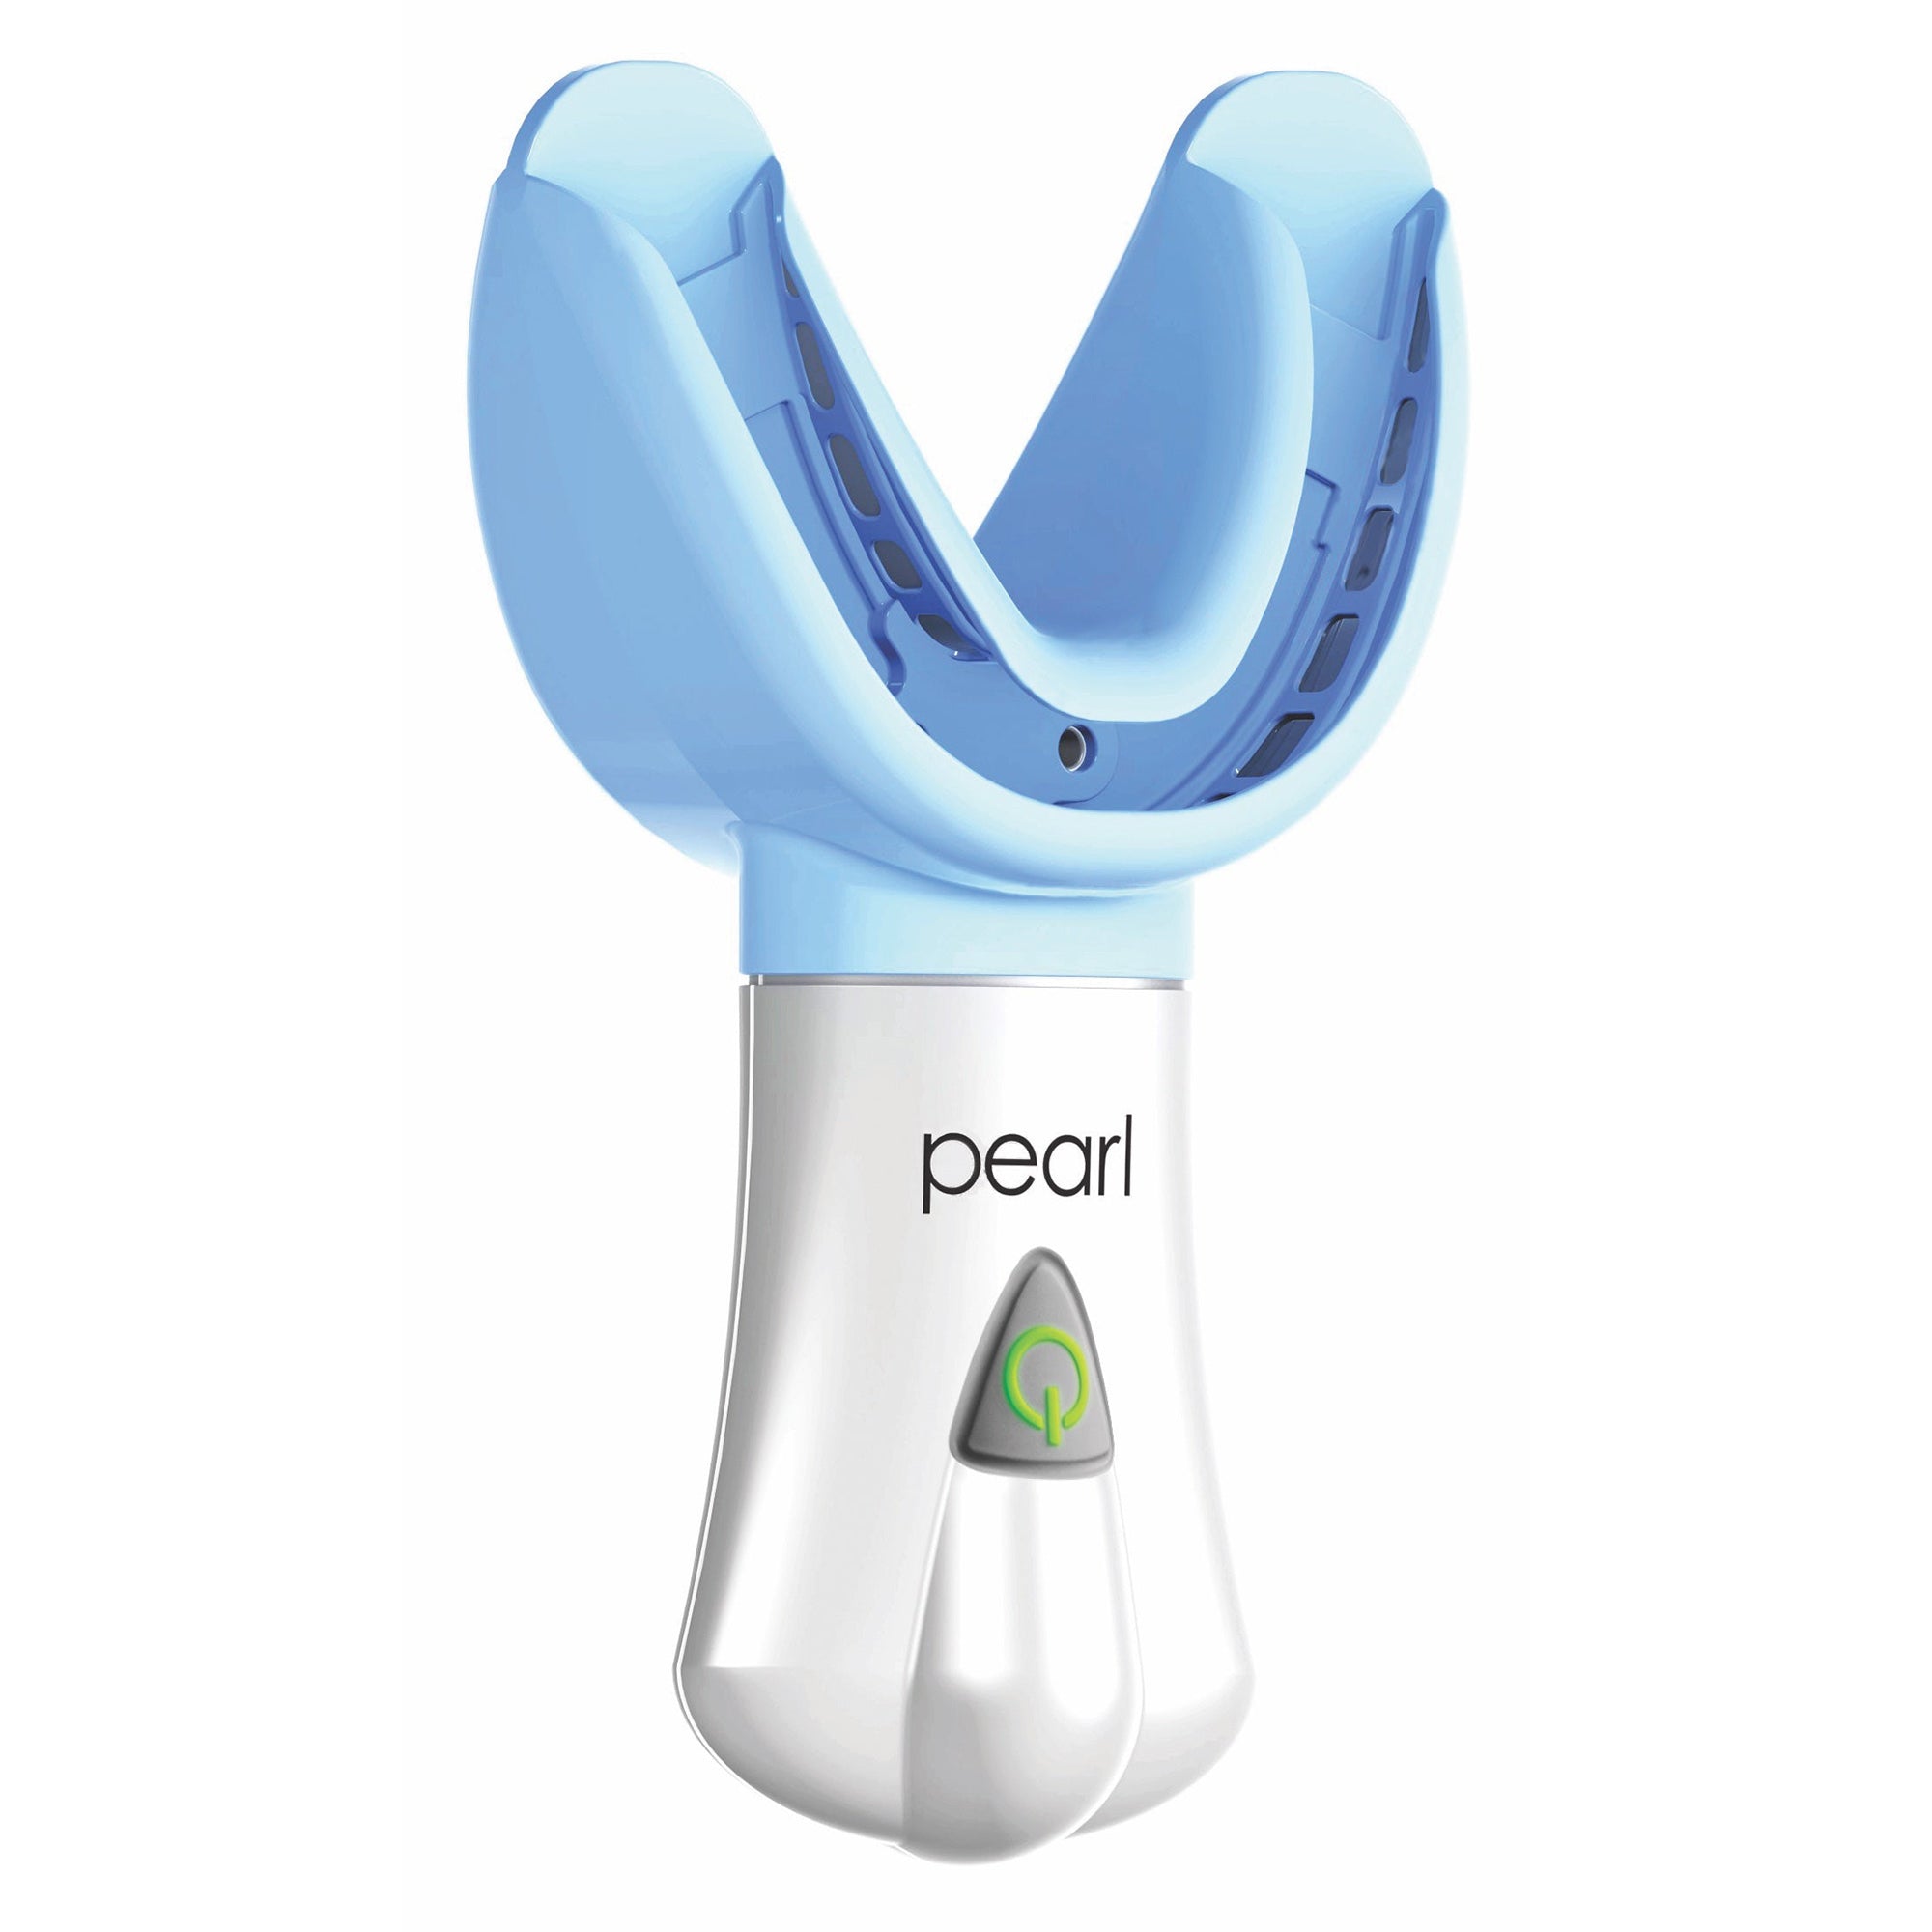 Beauty Ora Pearl Ionic Teeth Whitening System